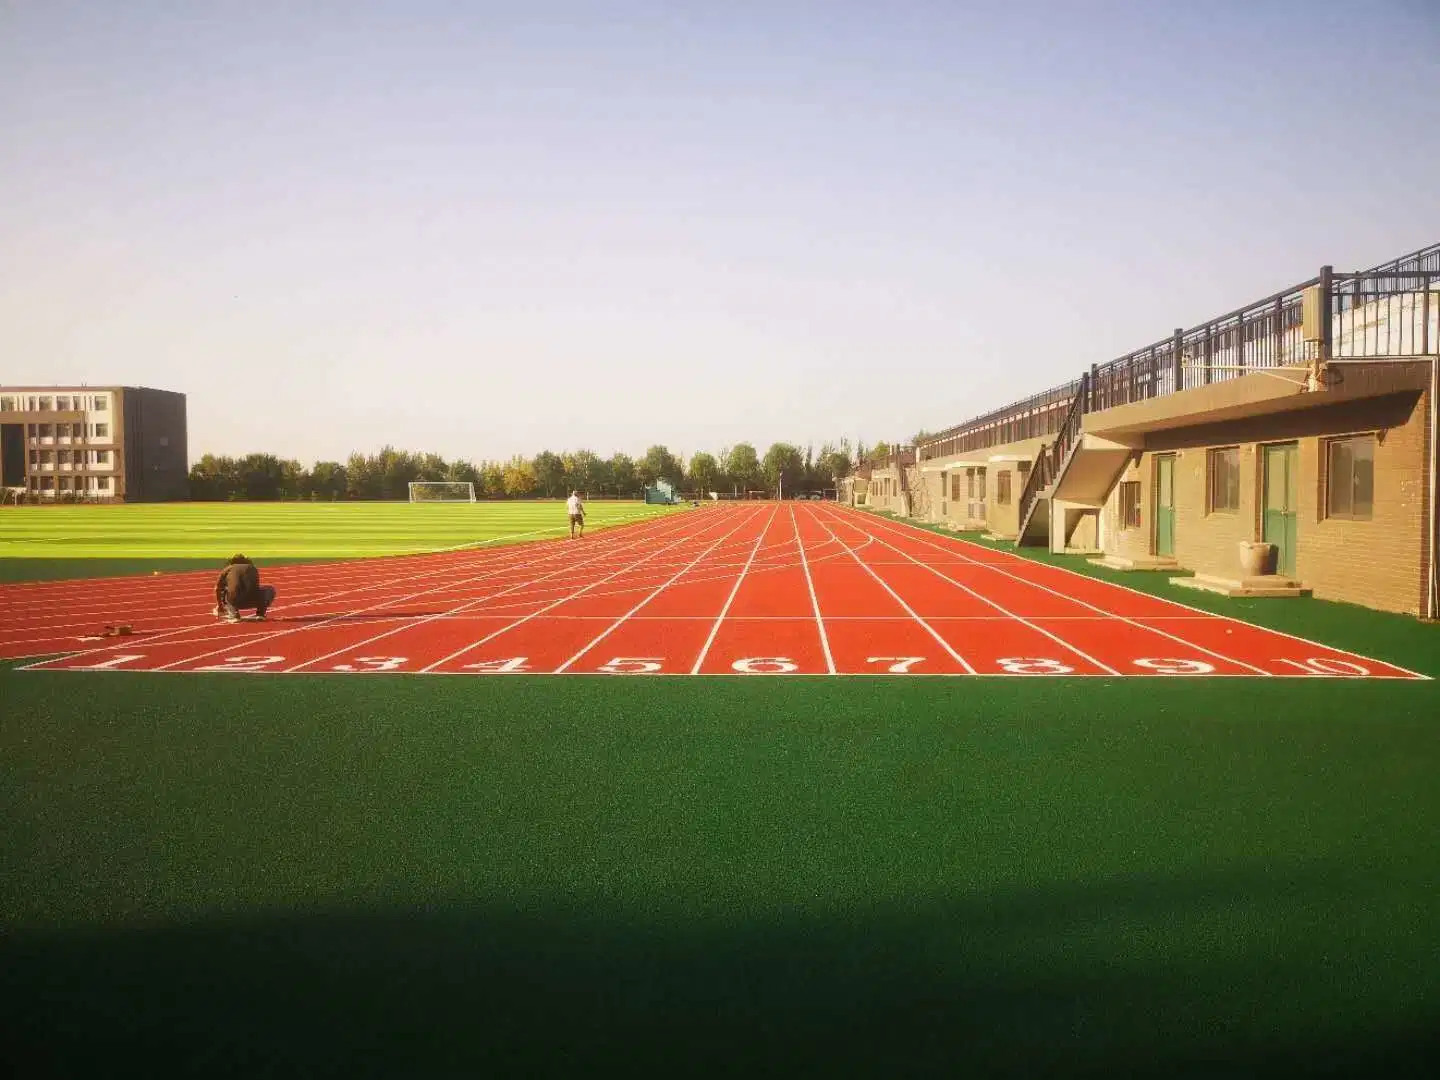 The Two Layer Sandwich System Running Track Consists of SBR Base Rubber Crumb Material Mixed Onsite with Polyurethane Binder and EPDM Rubberized Running Track